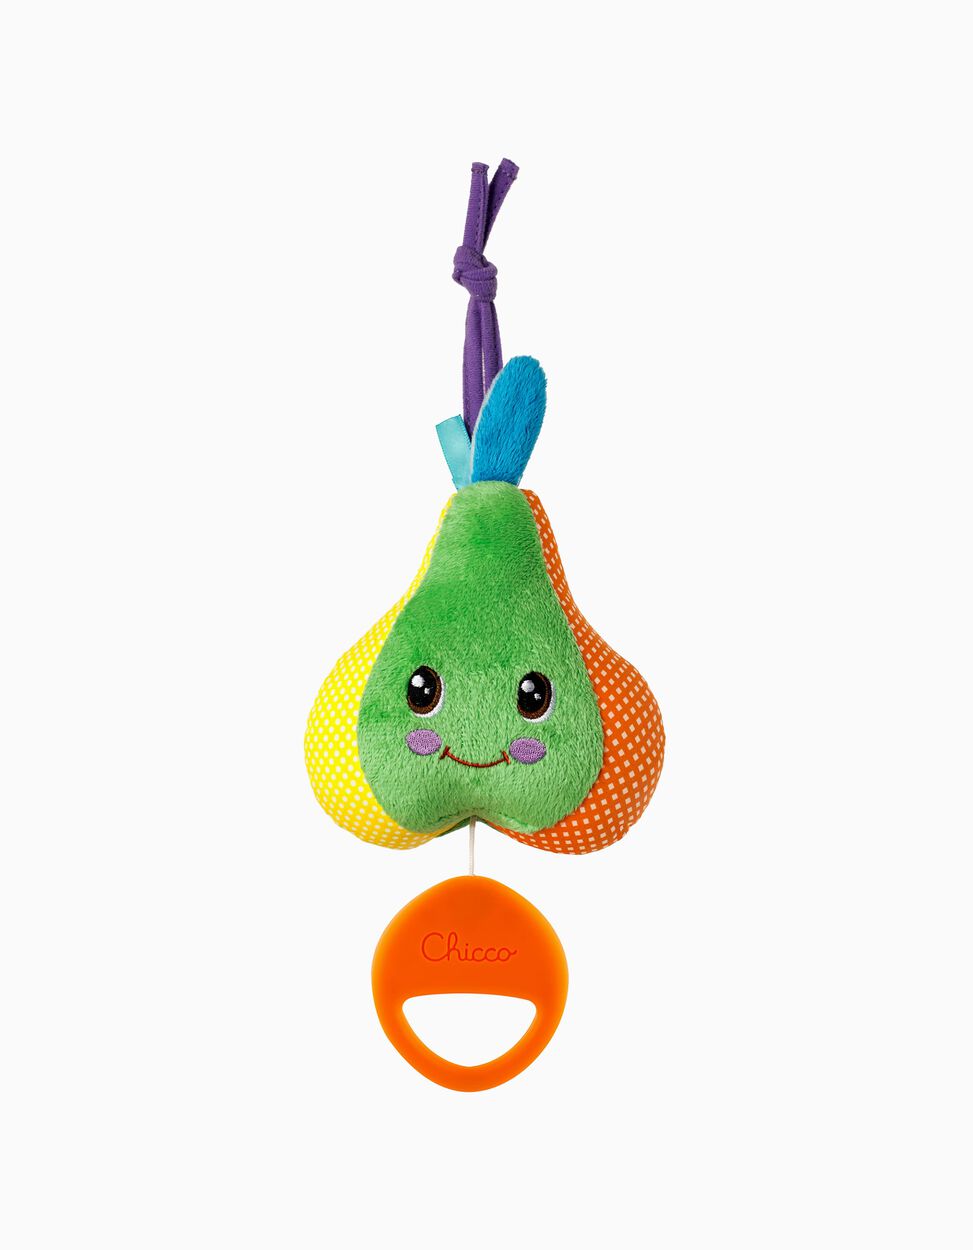 MUSICAL PEAR, CHICCO